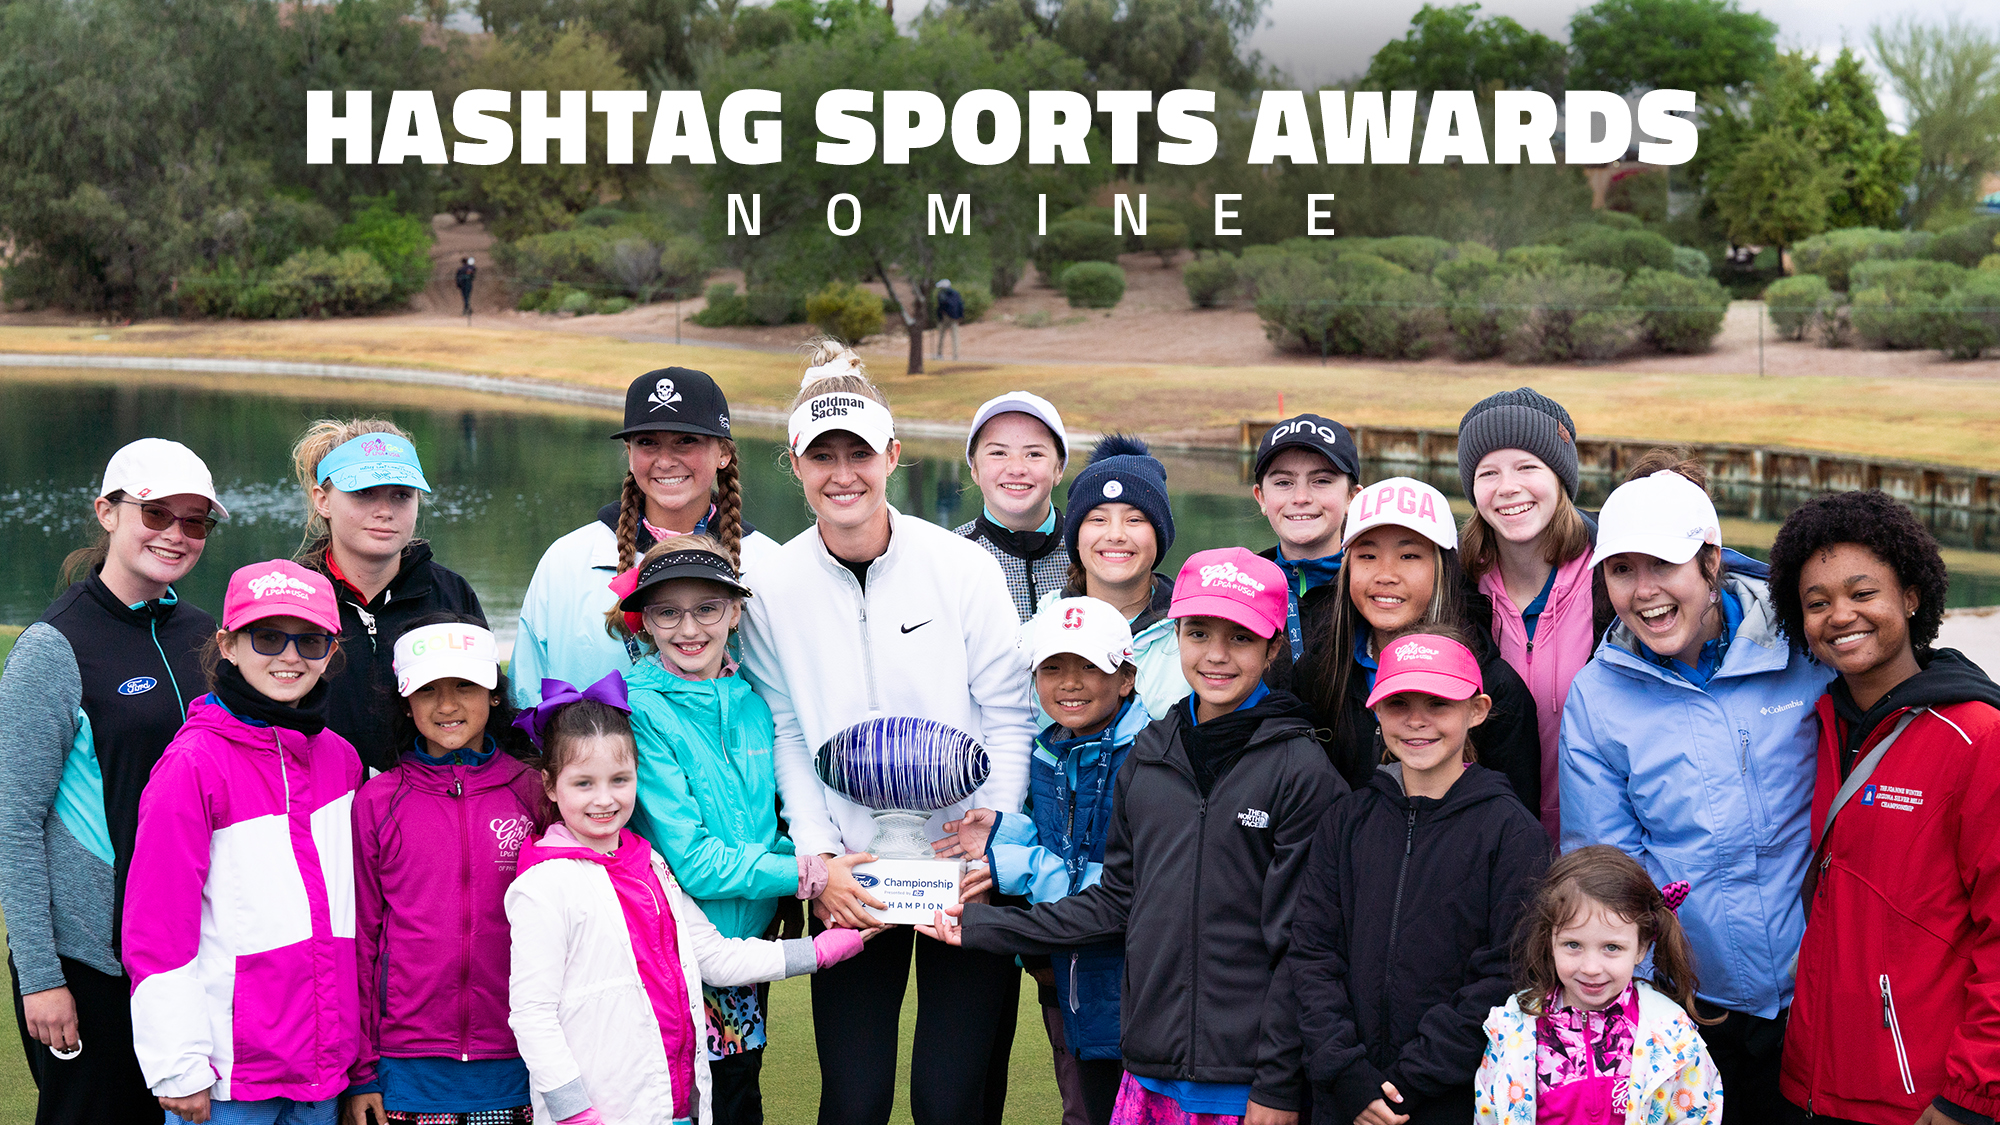 LPGA Makes Shortlist in Five Categories for 2024 Hashtag Sports Awards.